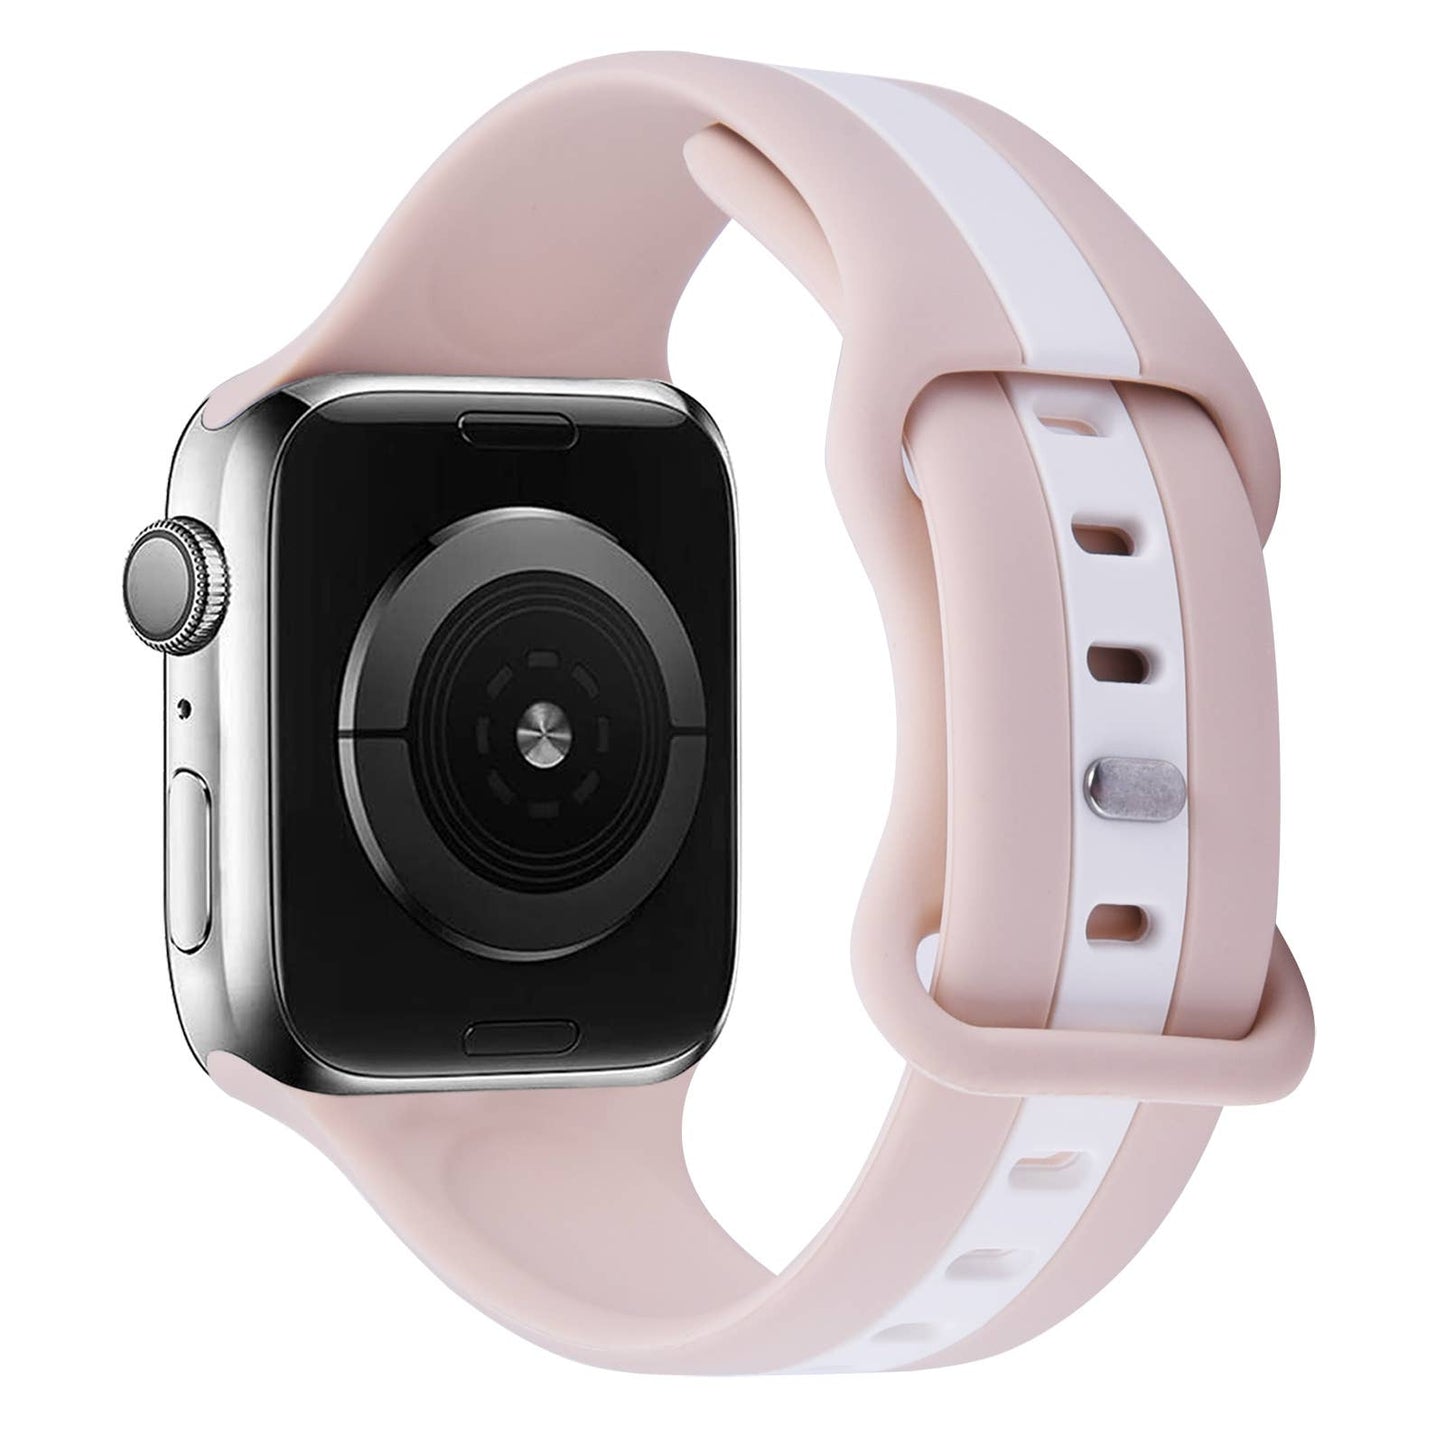 Apple Watch Silicone Band With Bee Charm Stud